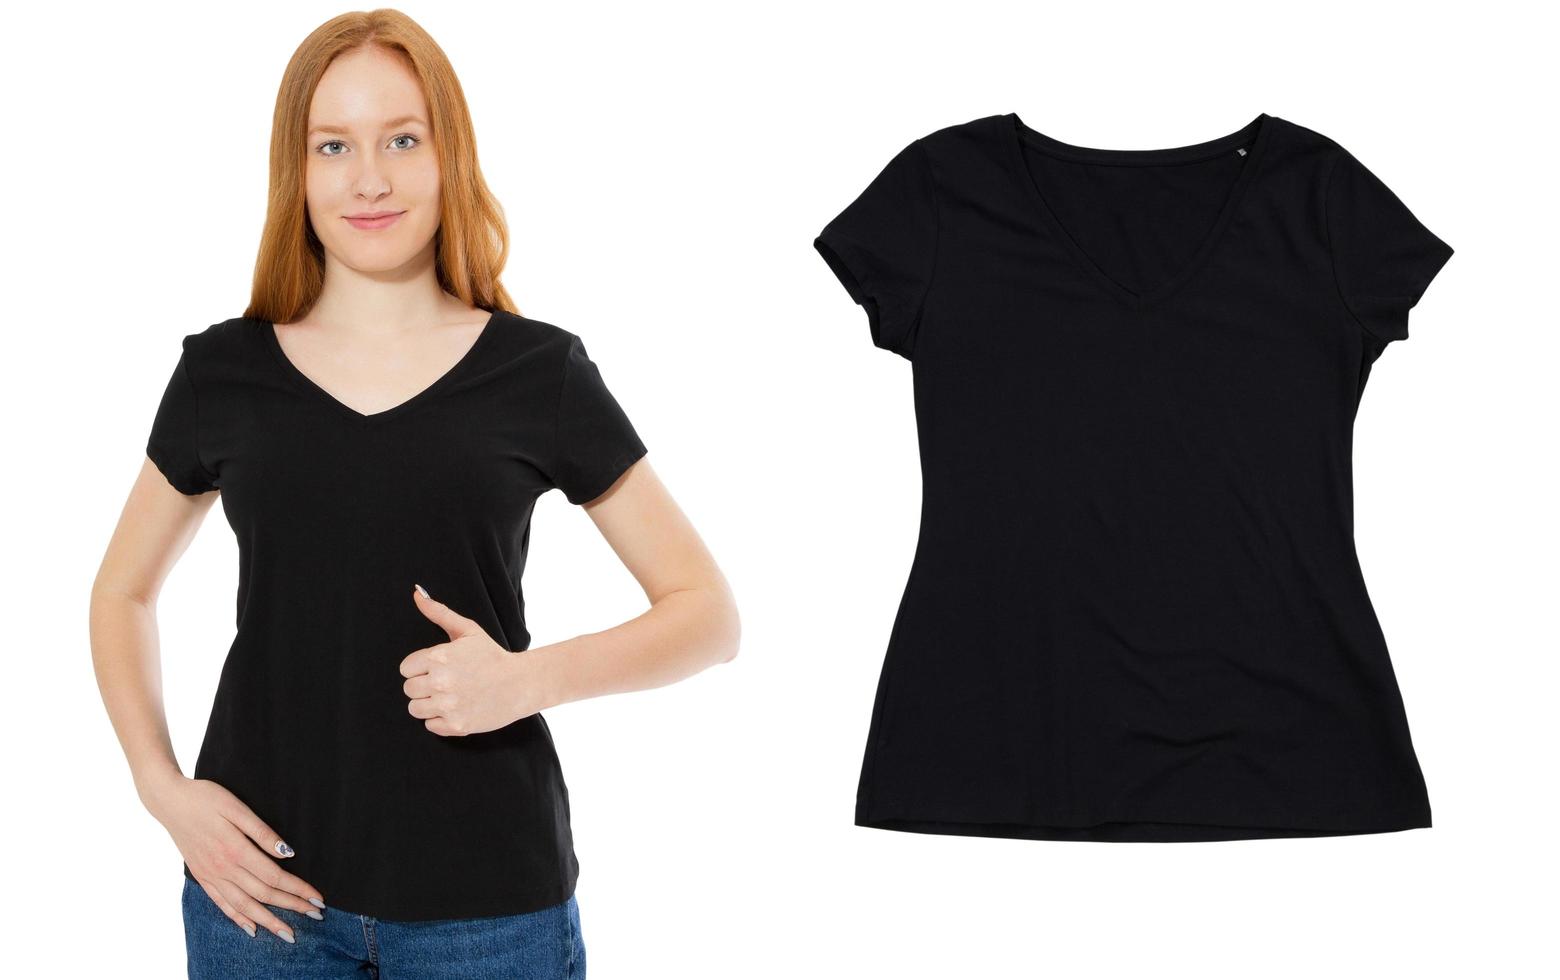 T-shirt design and people concept - close up of young red hair woman in blank black t-shirt, shirt front and rear isolated. T shirt close up photo